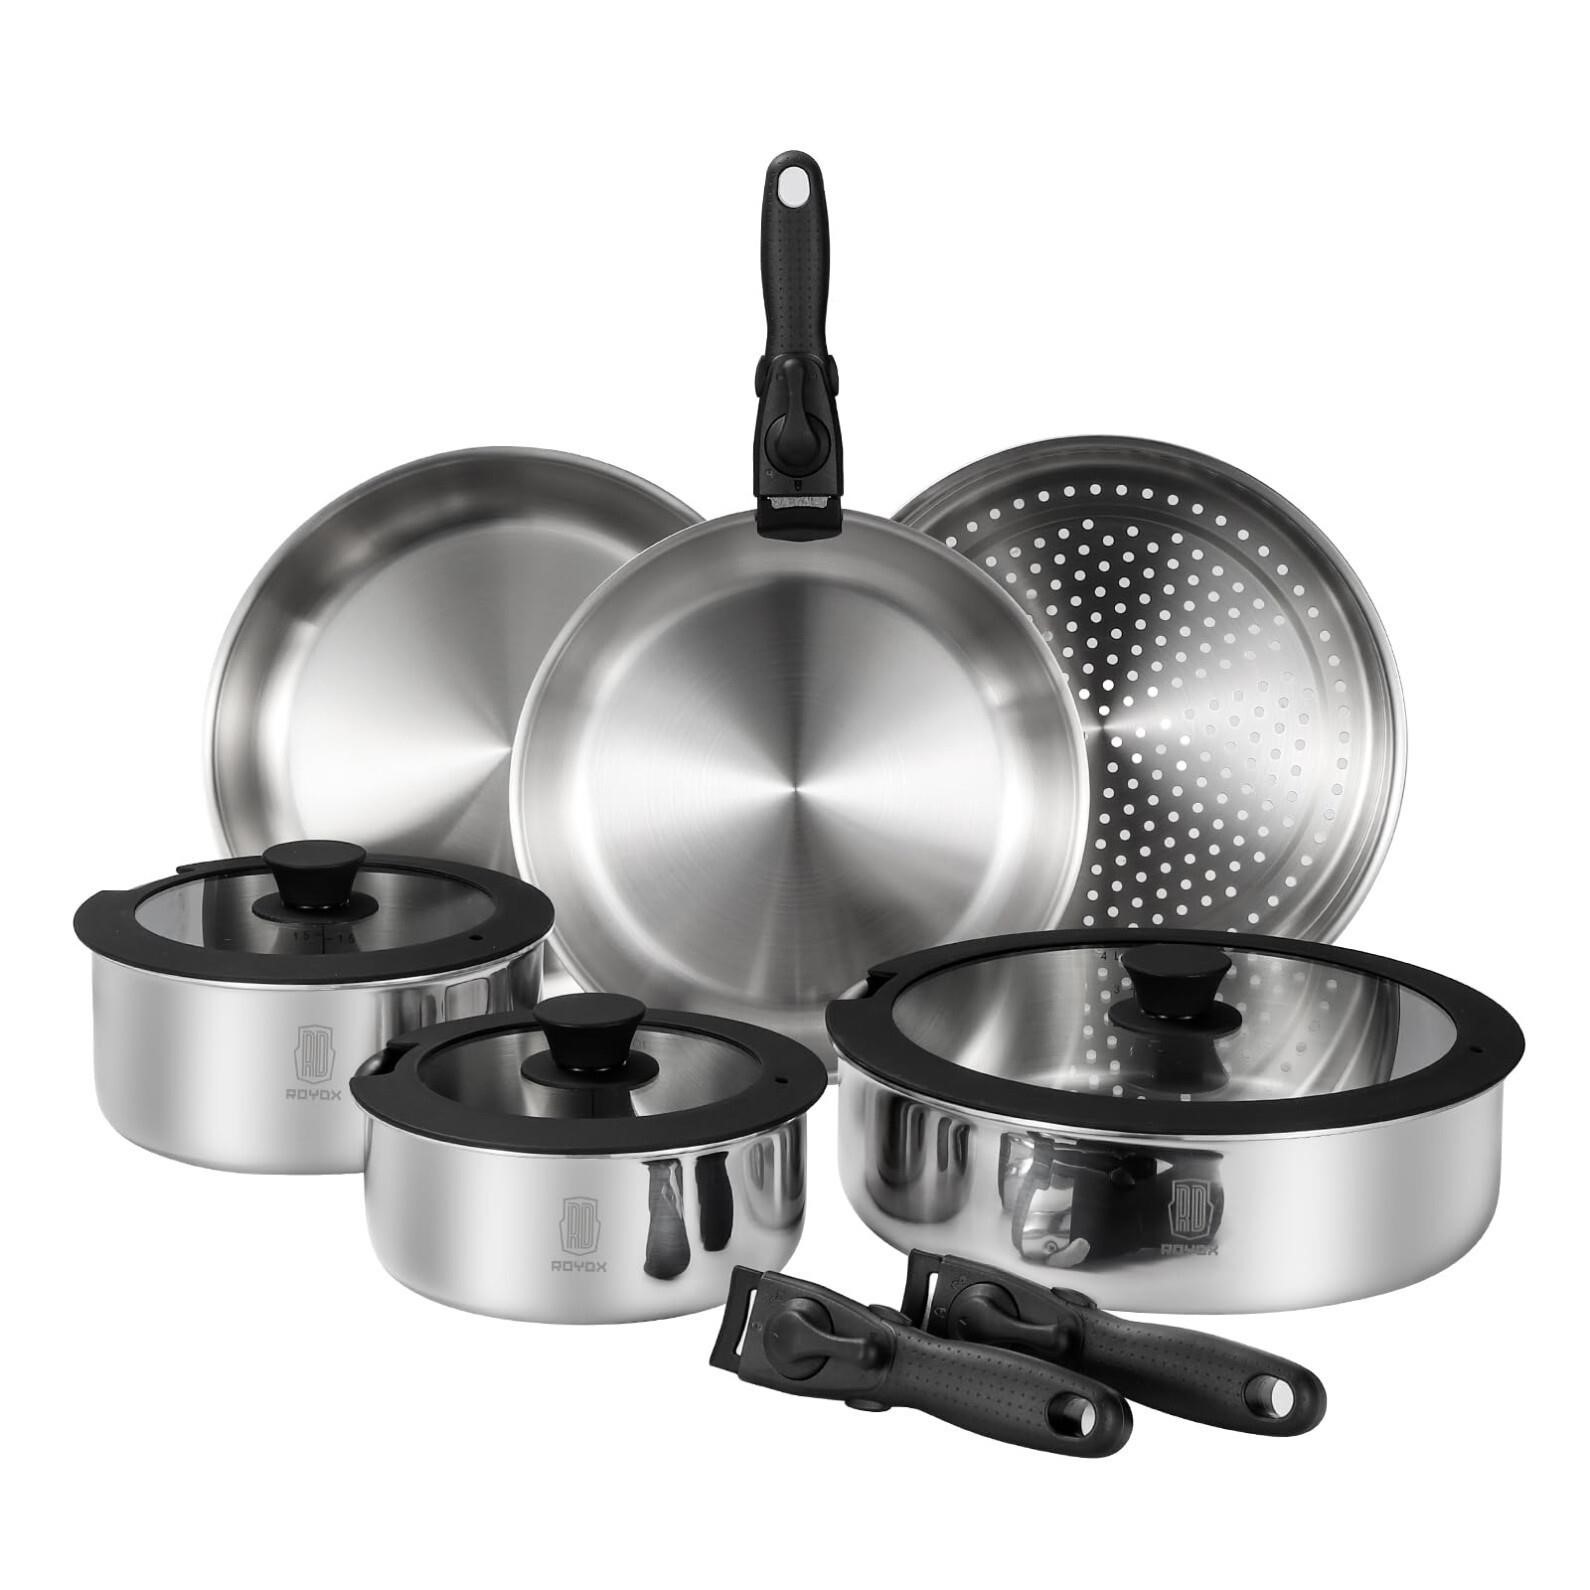 Pots and Pans Set, Stainless Steel with Removable